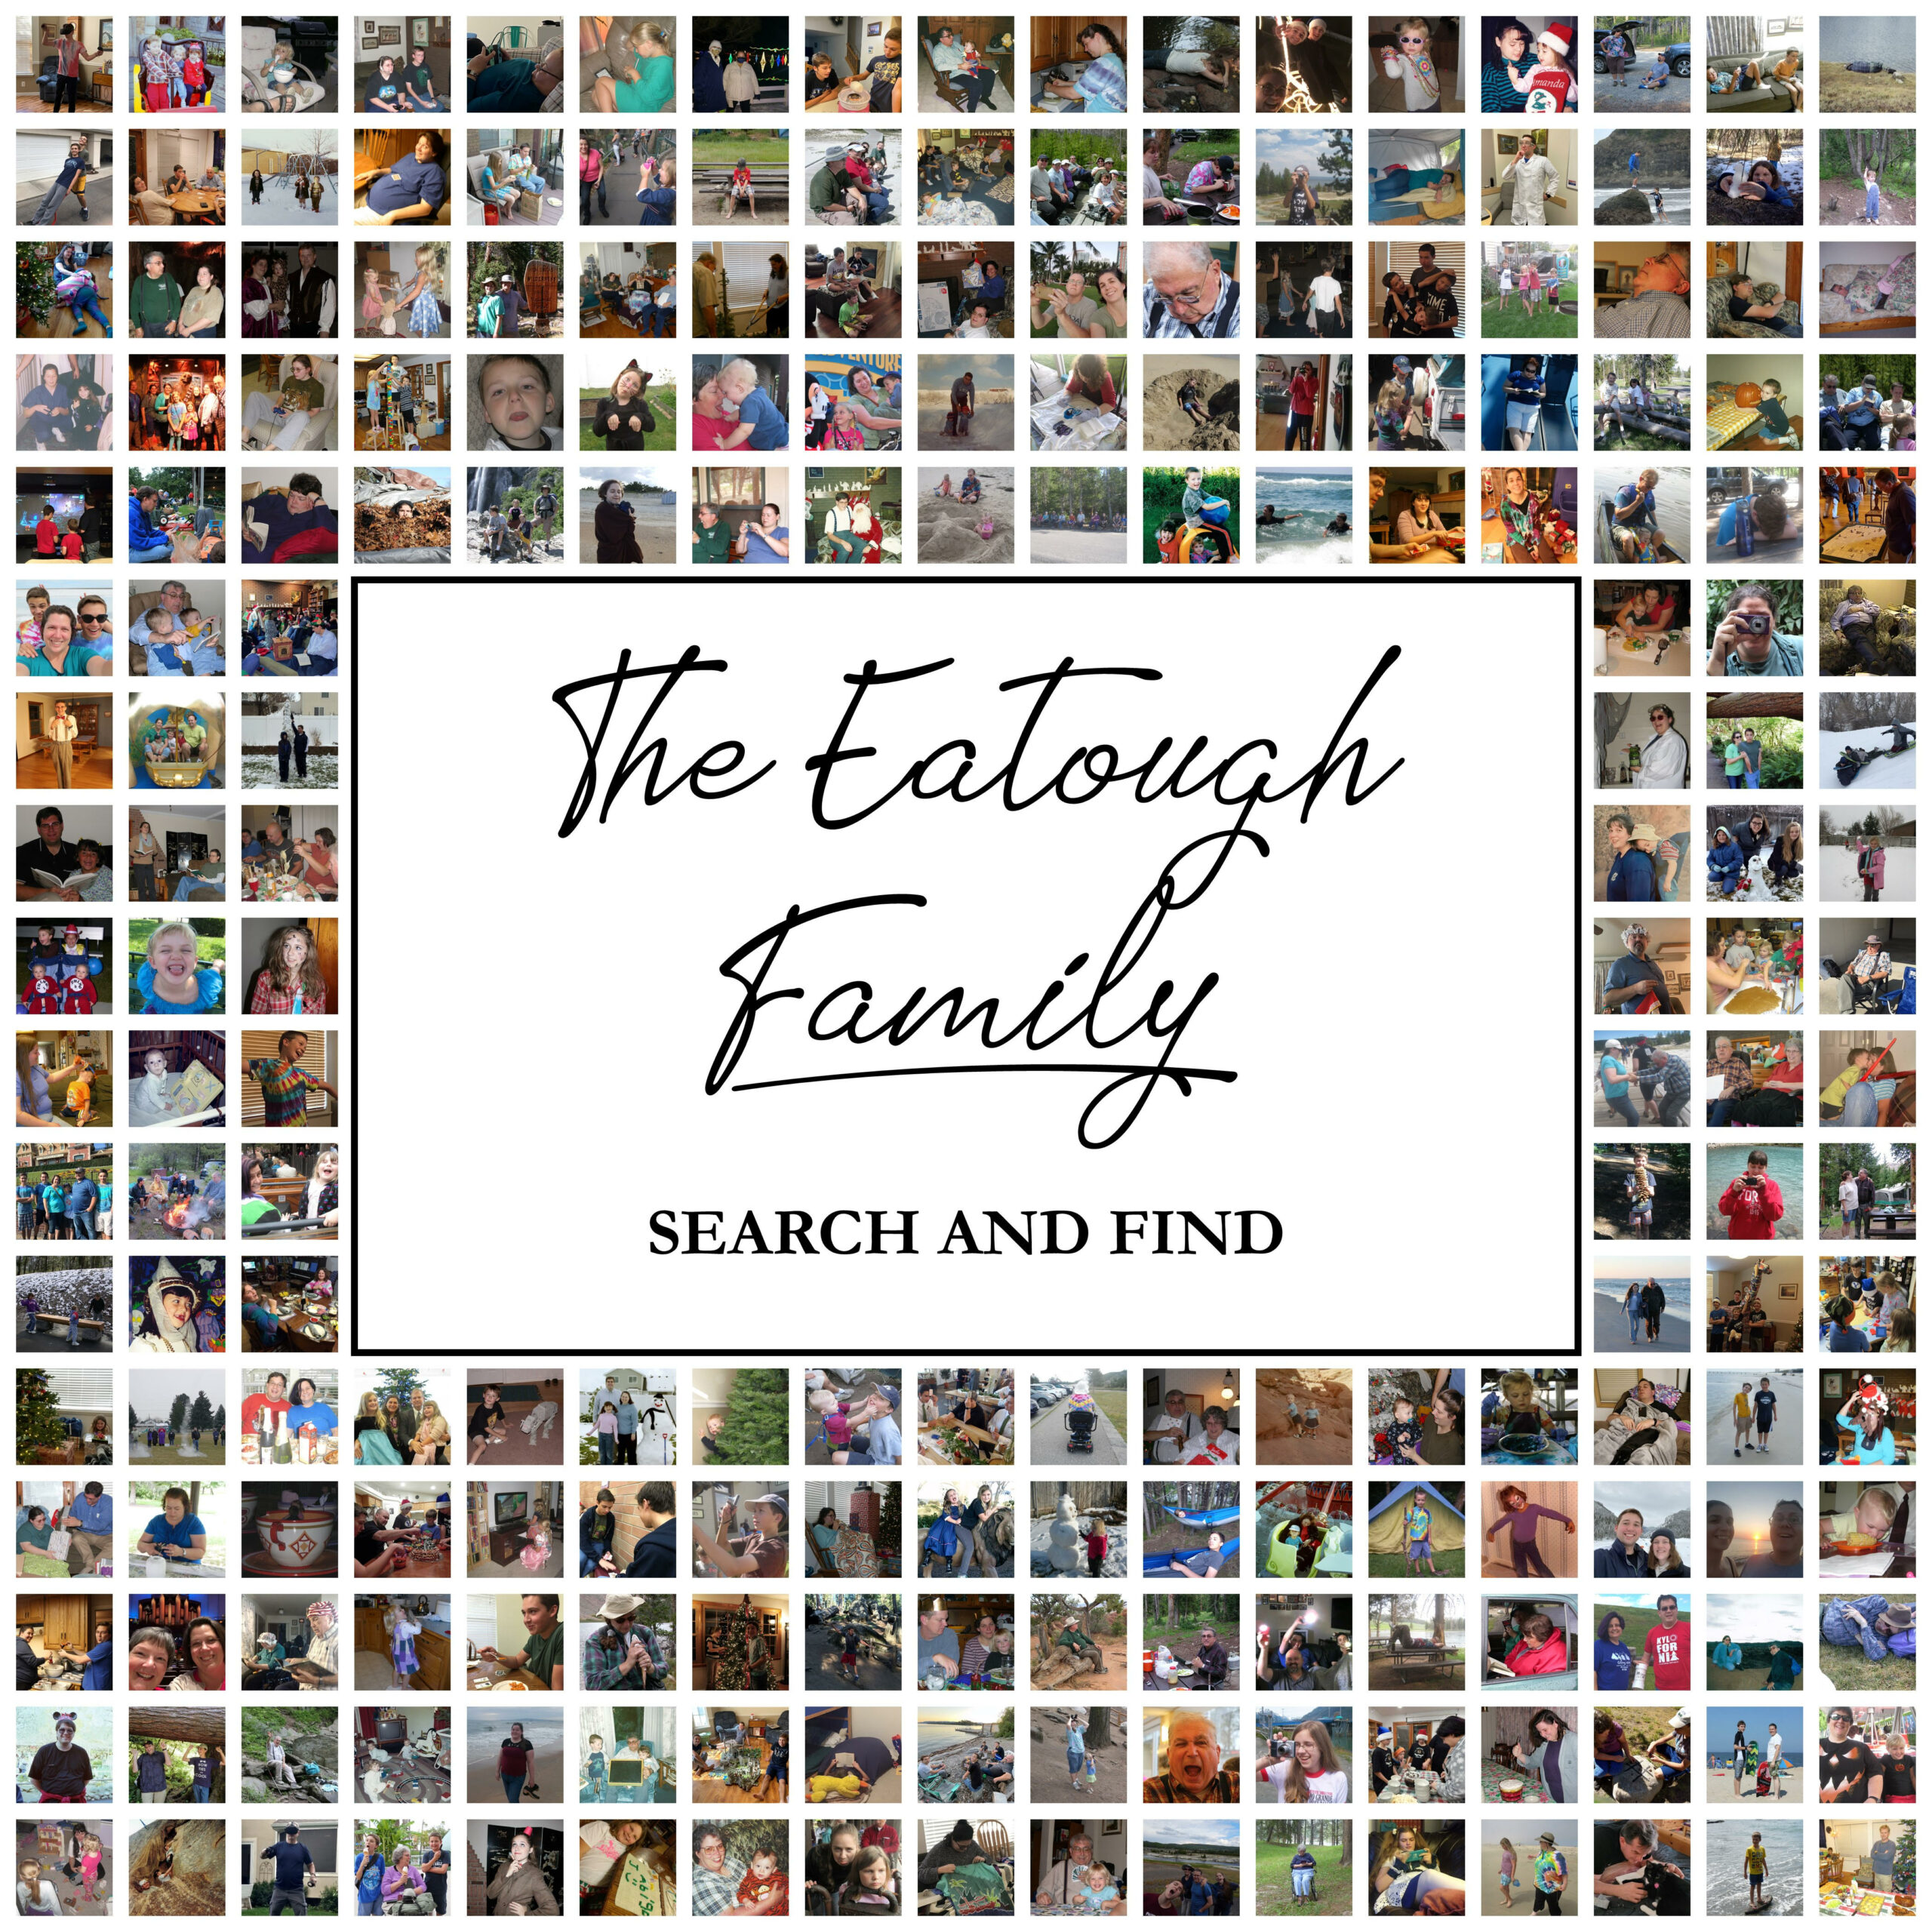 The Eatough Family Search and Find (2022) 

I edited this project for my daughter Amanda who created this book as a gift for her paternal grandparents, aunts, uncles, and cousins.